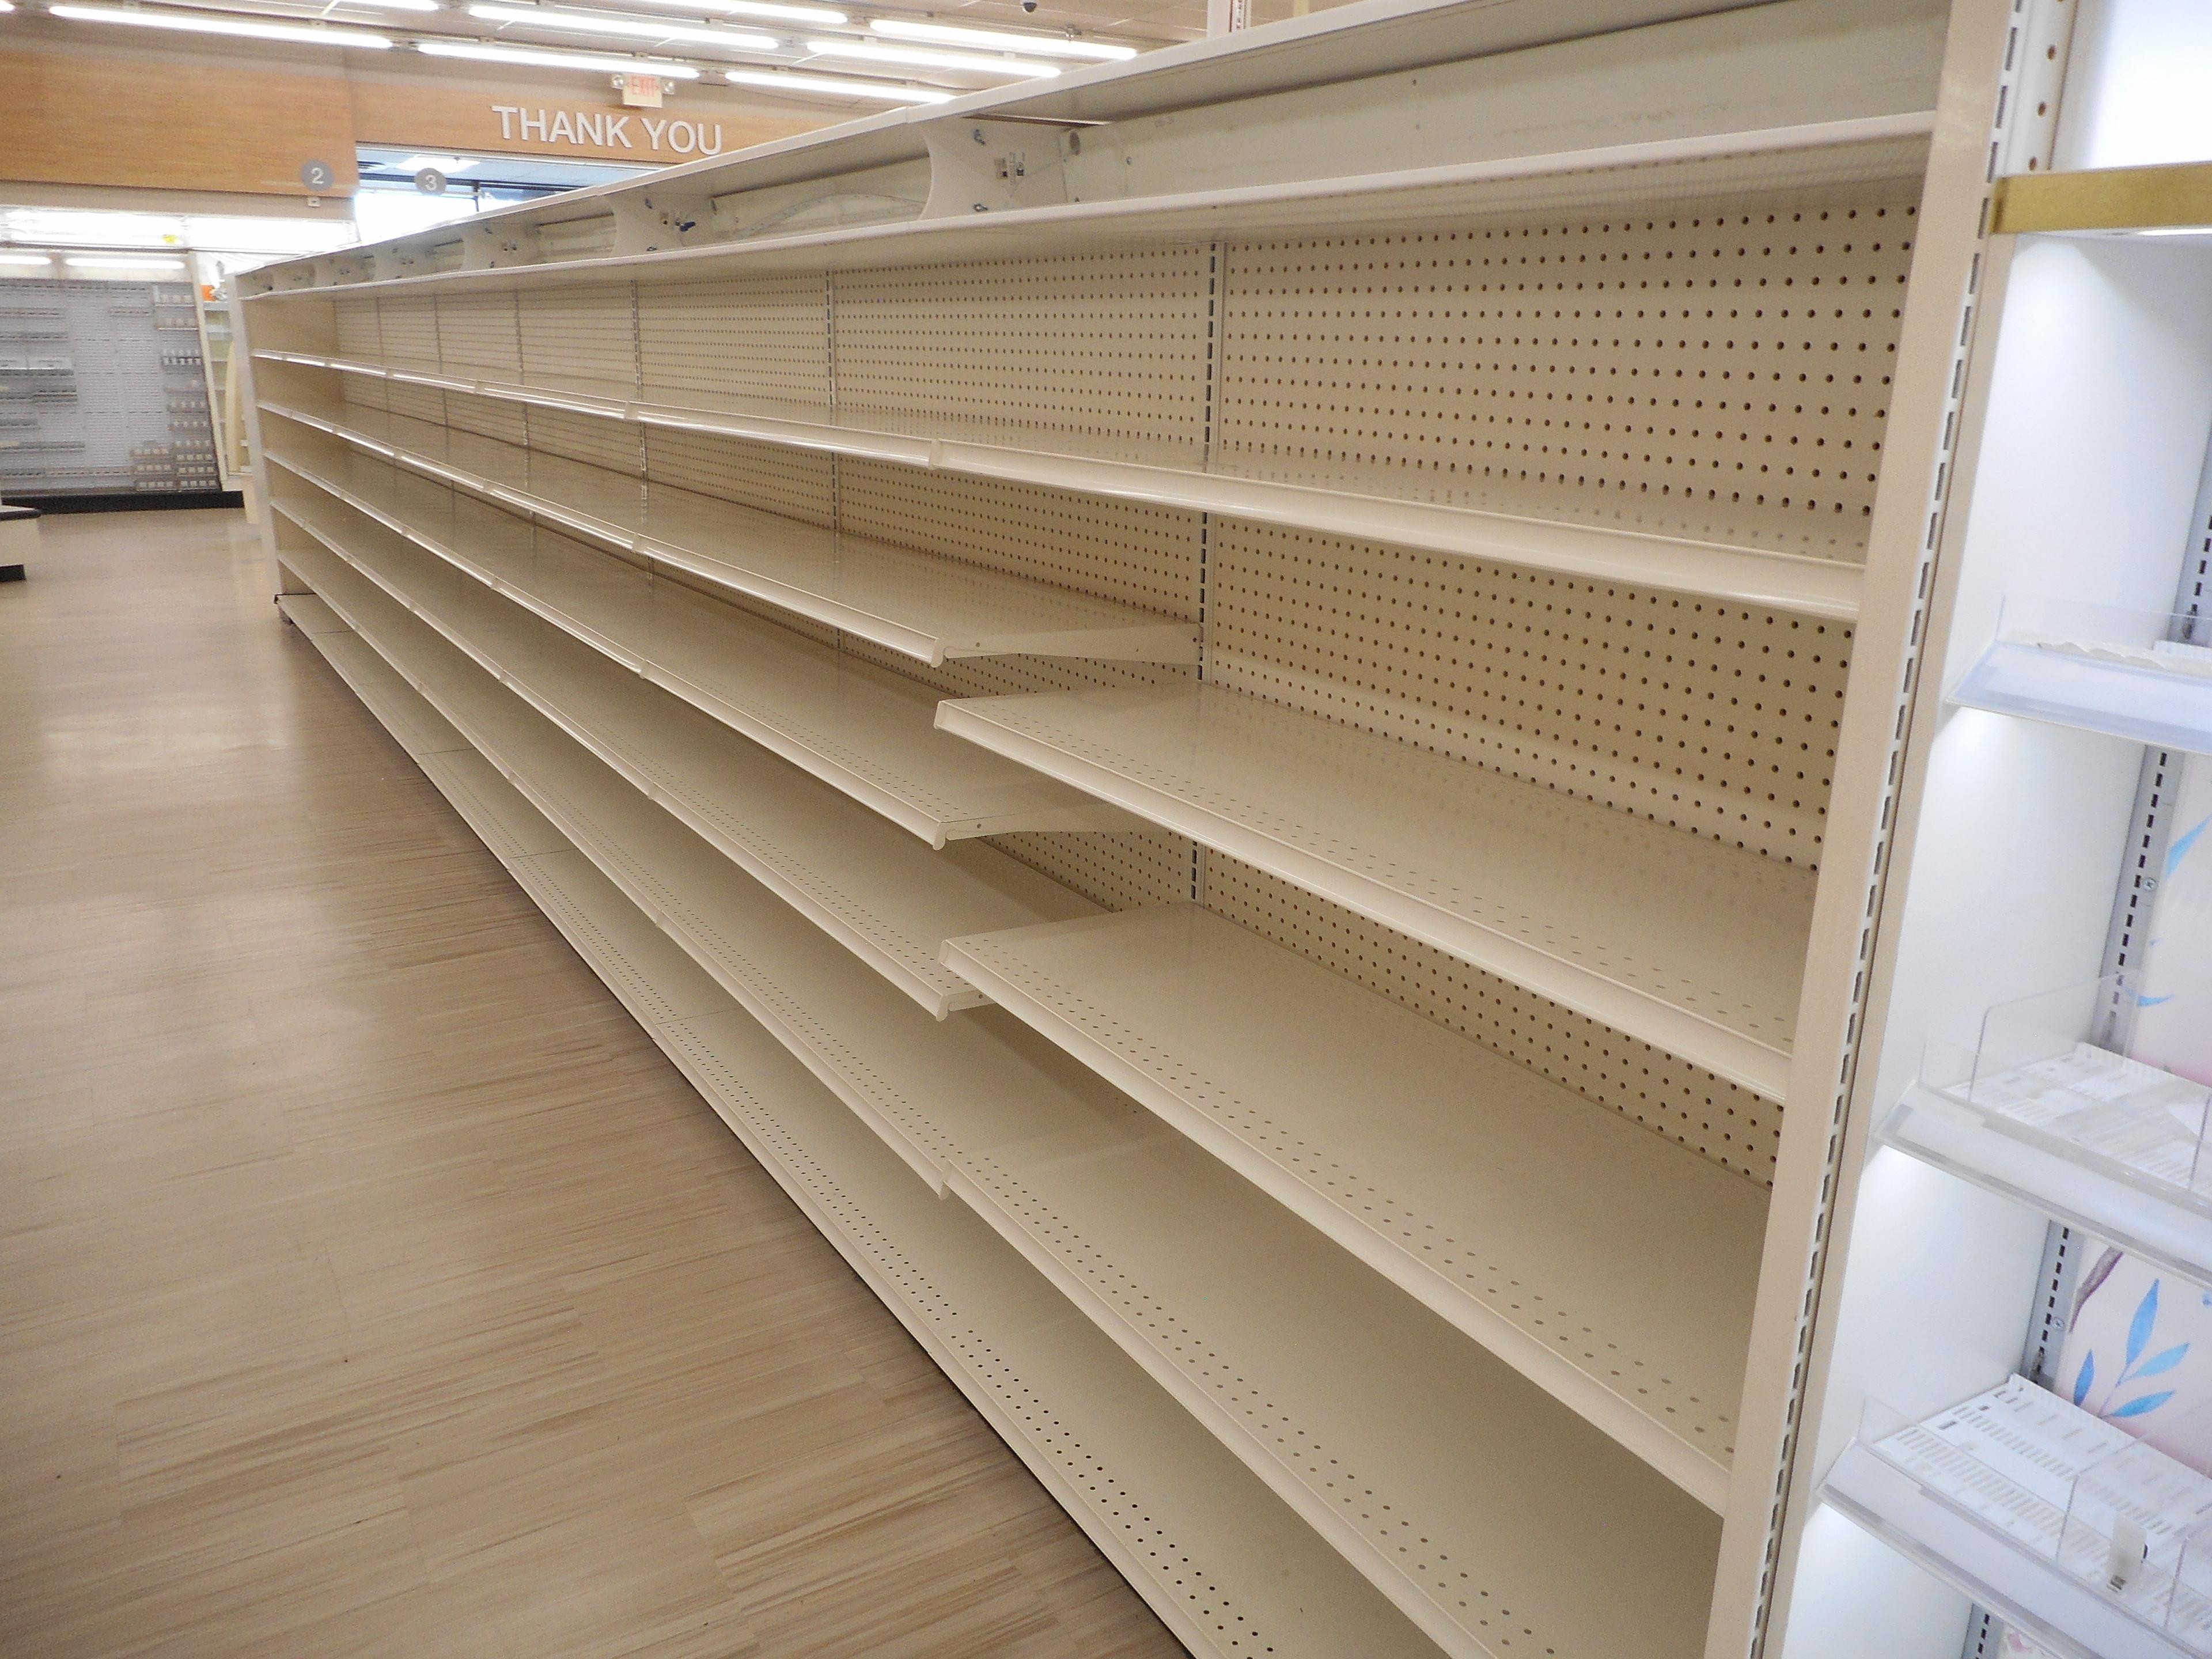 28 FT 2-SIDED WHITE SHELVING WITH NO END CAP (PRICED PER FOOT) 60 INCHES TA